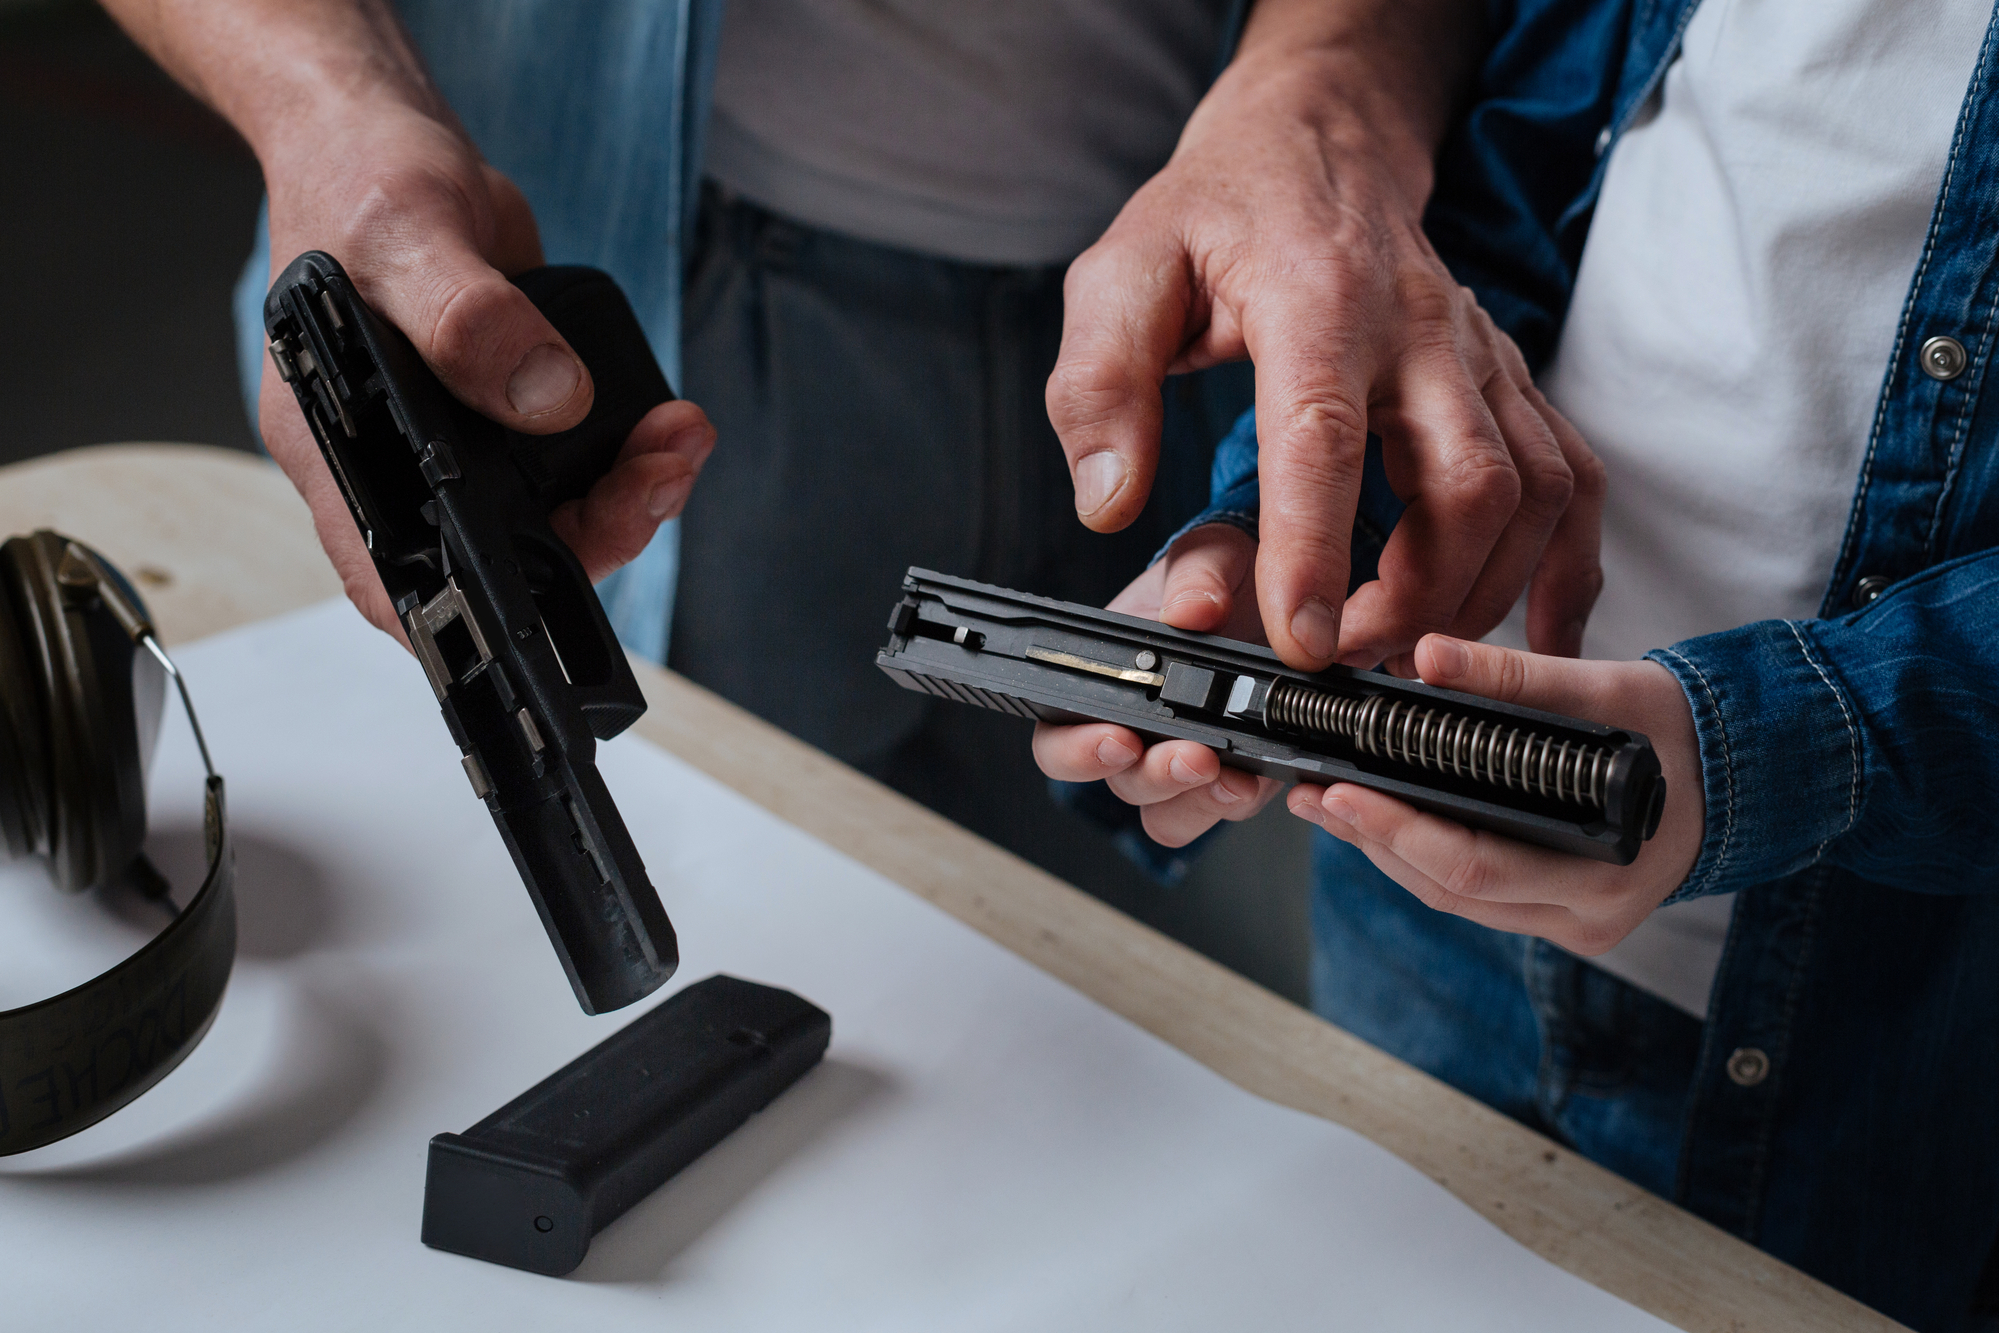 proper cleaning and teaching with gun safety